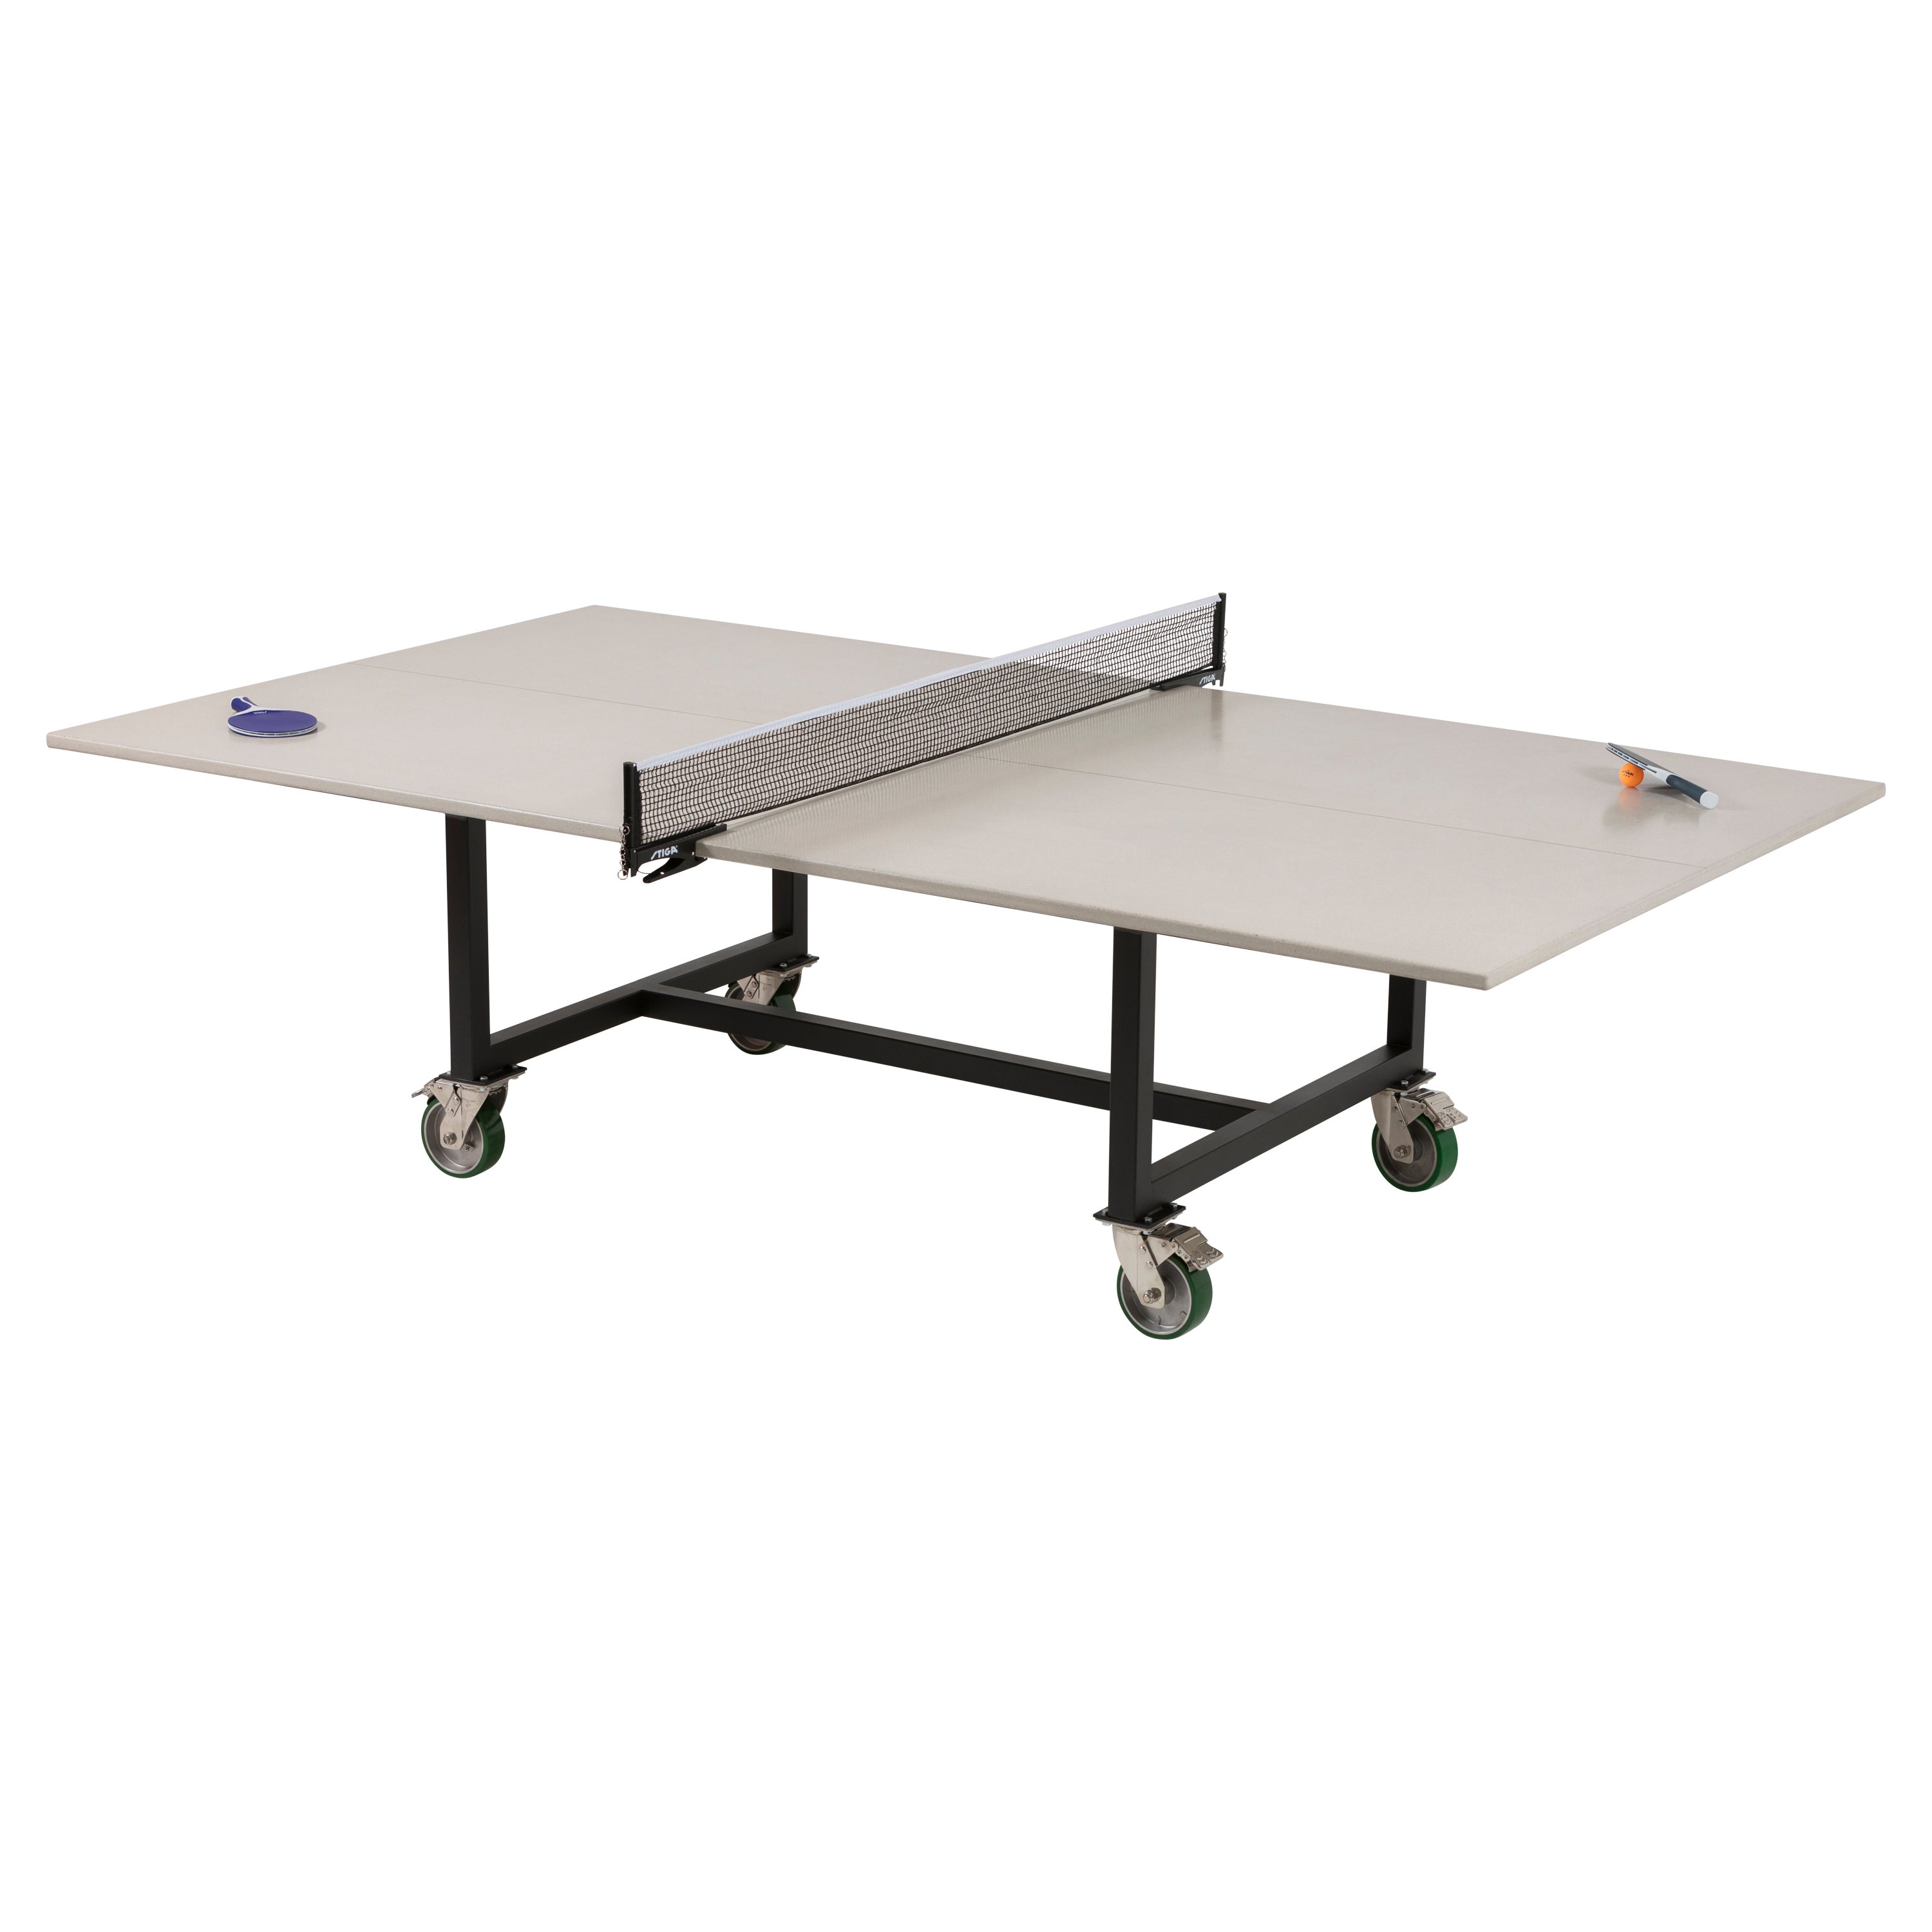 James de Wulf Concrete Rolling Ping Pong Table